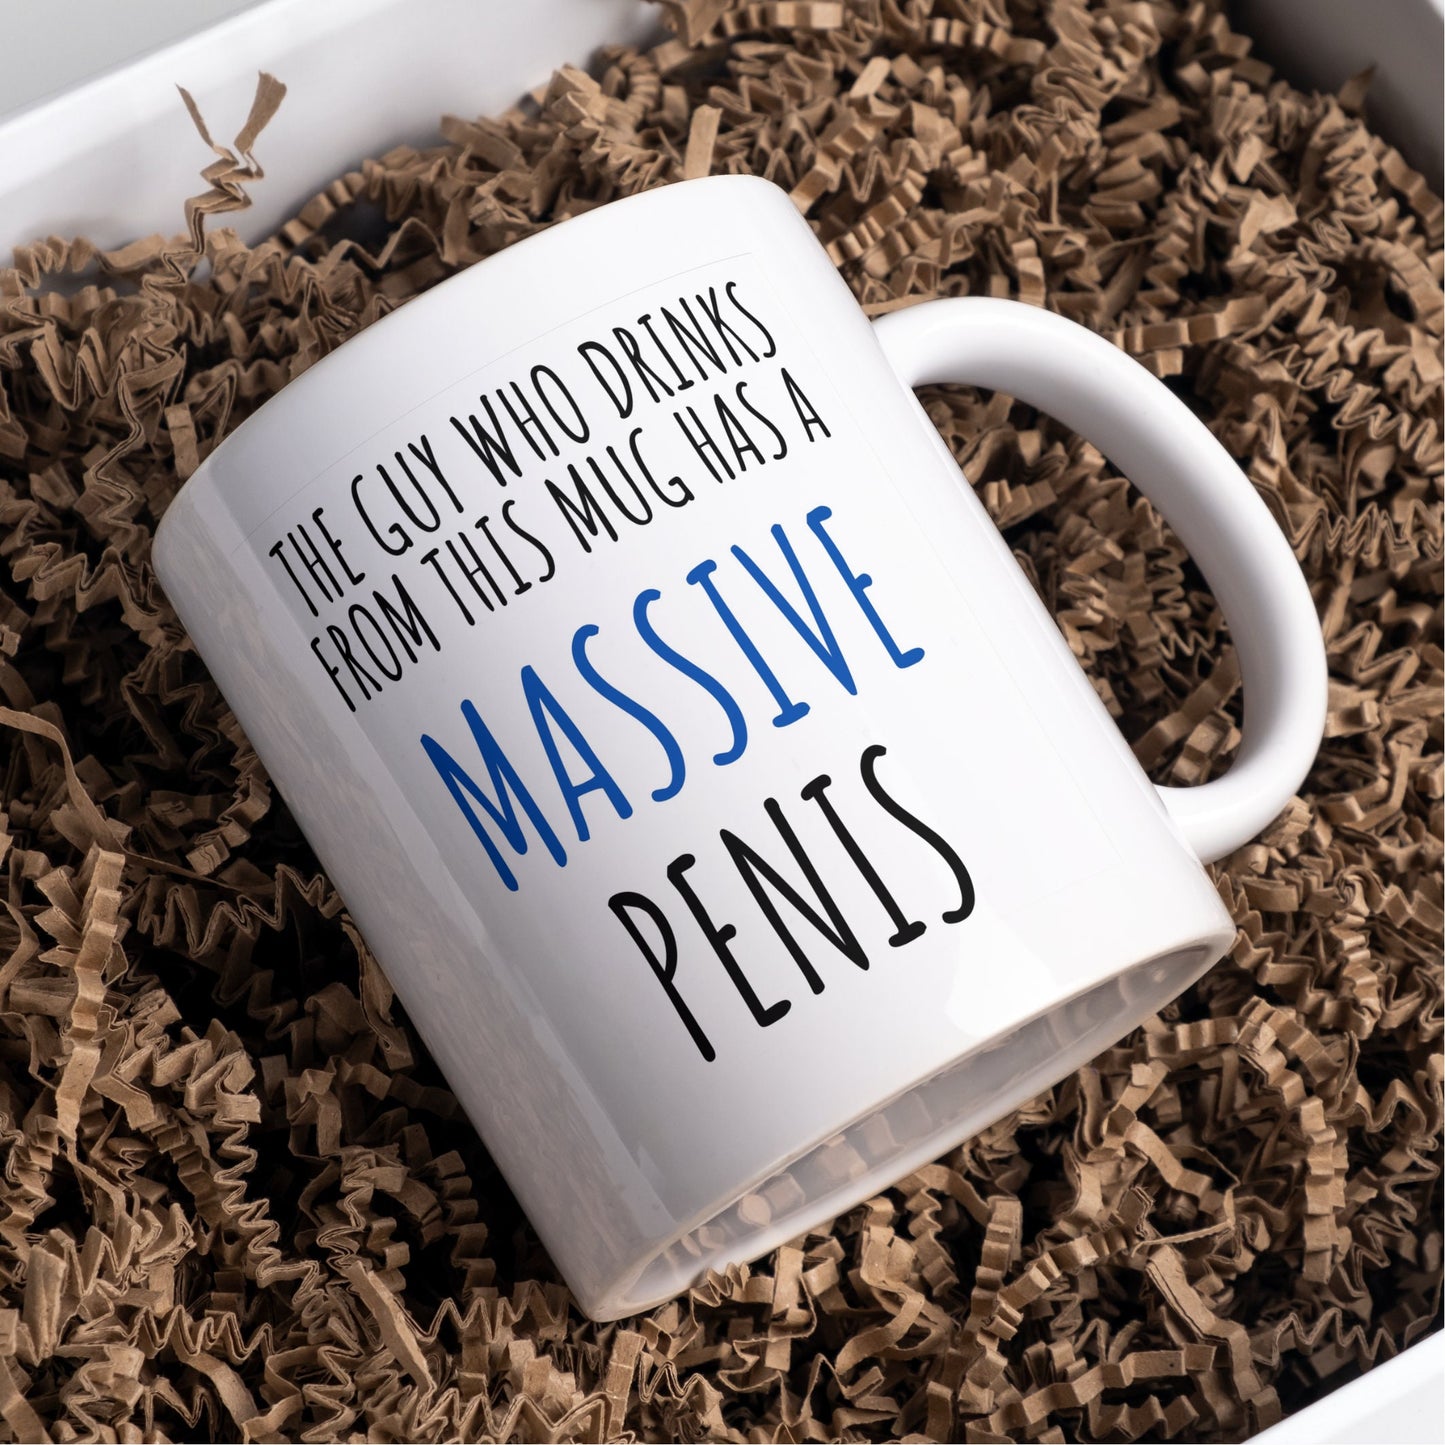 The Guy who drinks from this mug has a massive Penis, Funny rude Mug - gift for boyfriend or husband